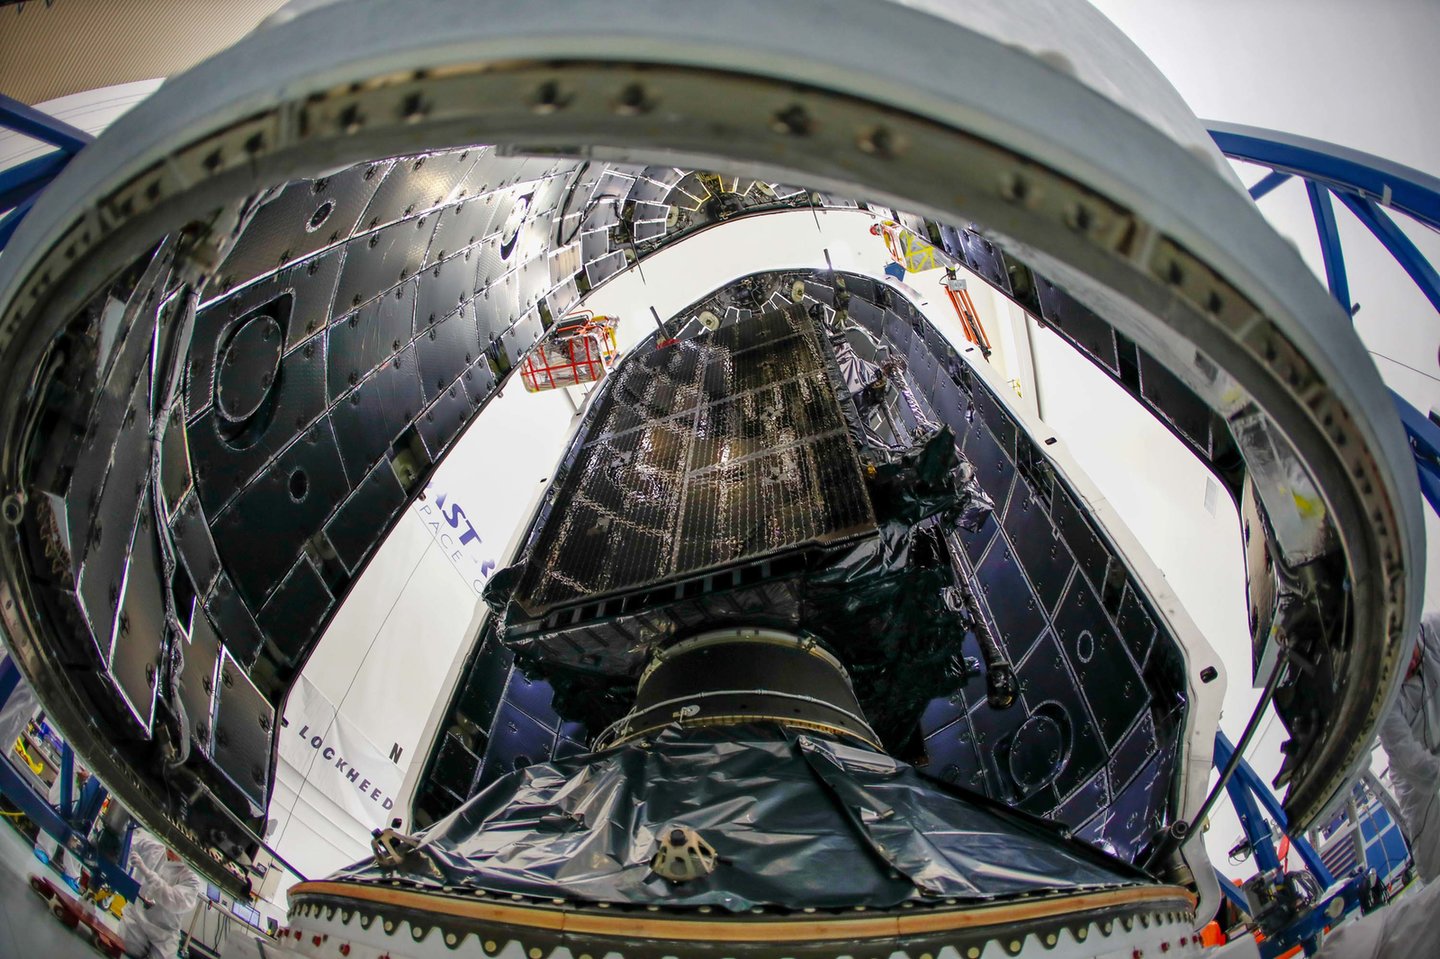 GPS III SV01 encapsulated in its launch fairings for launch